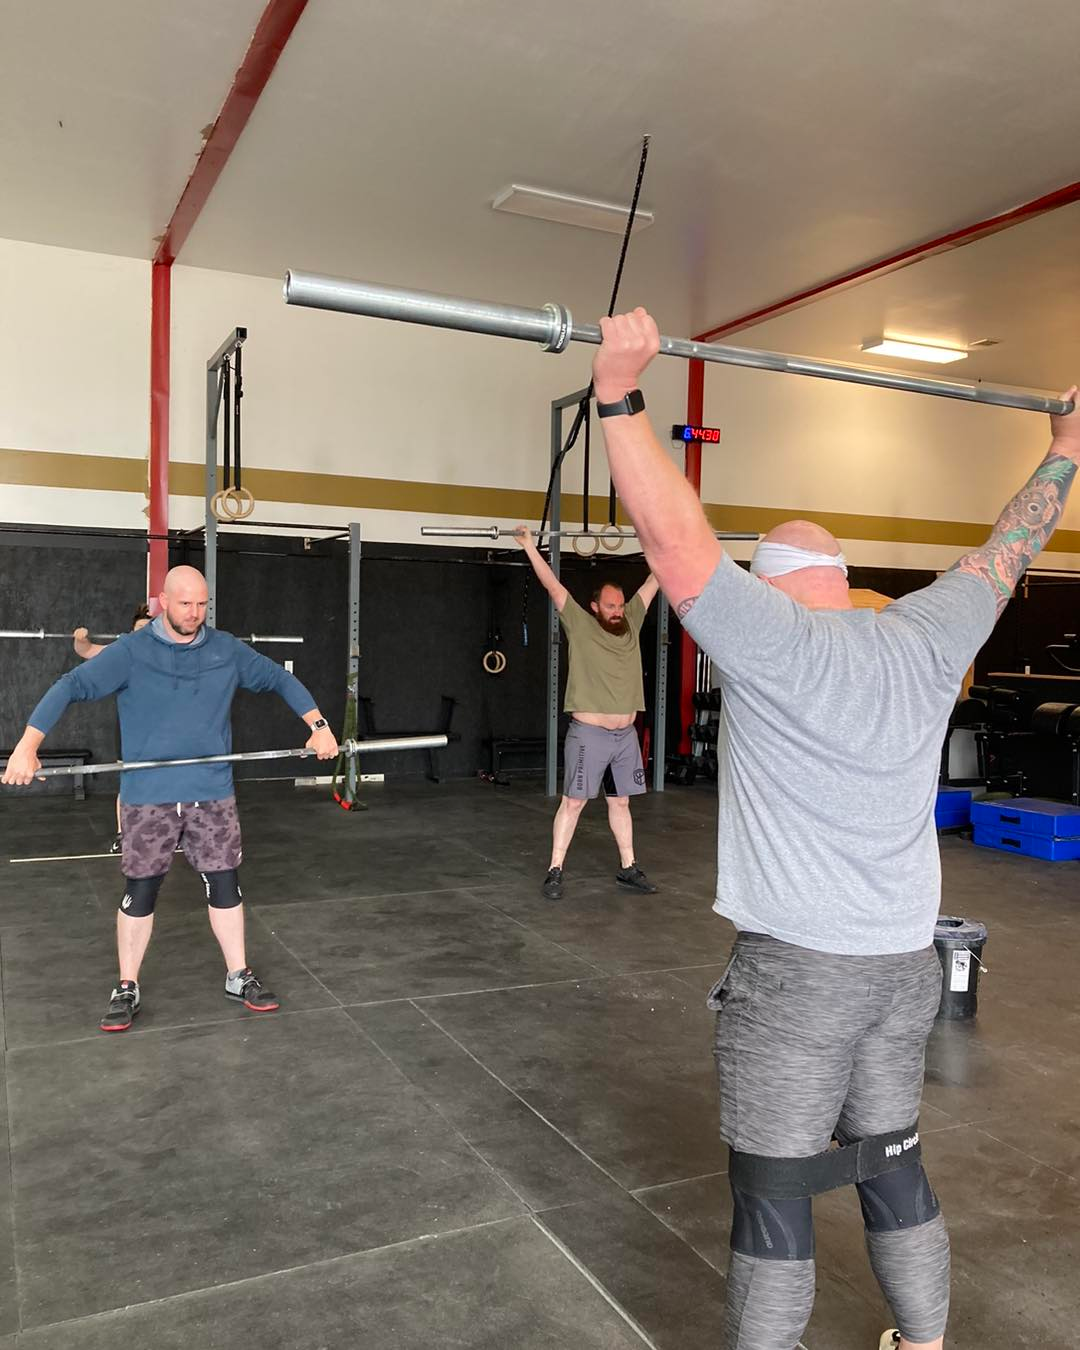 Group of people of different ages and skill levels doing CrossFit exercises in a gym